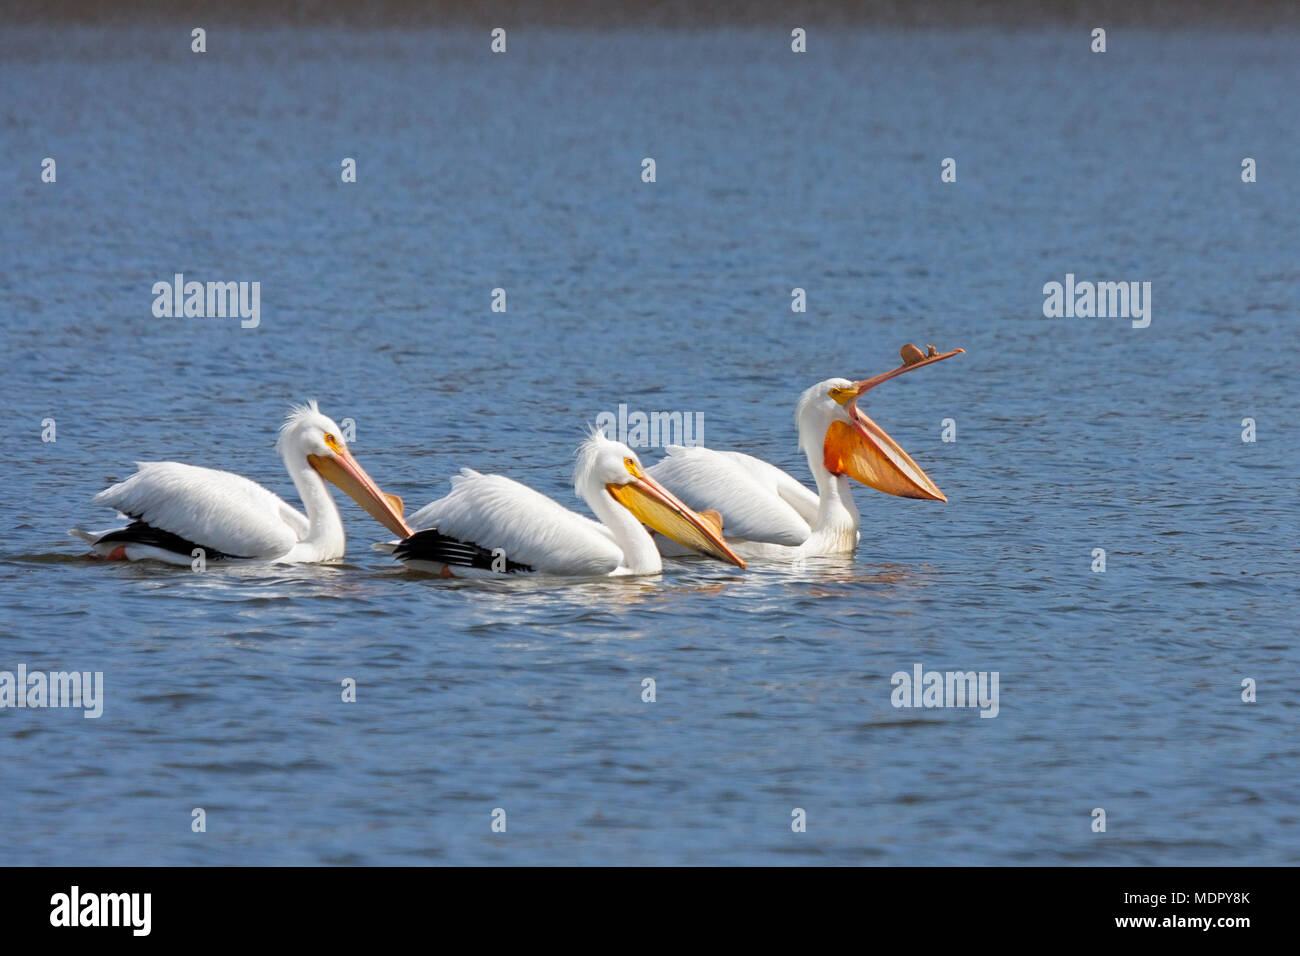 An American white pelicans lead two others on a boring swim. The lead pelican yawns as they paddle close together on a quiet blue lake. Stock Photo